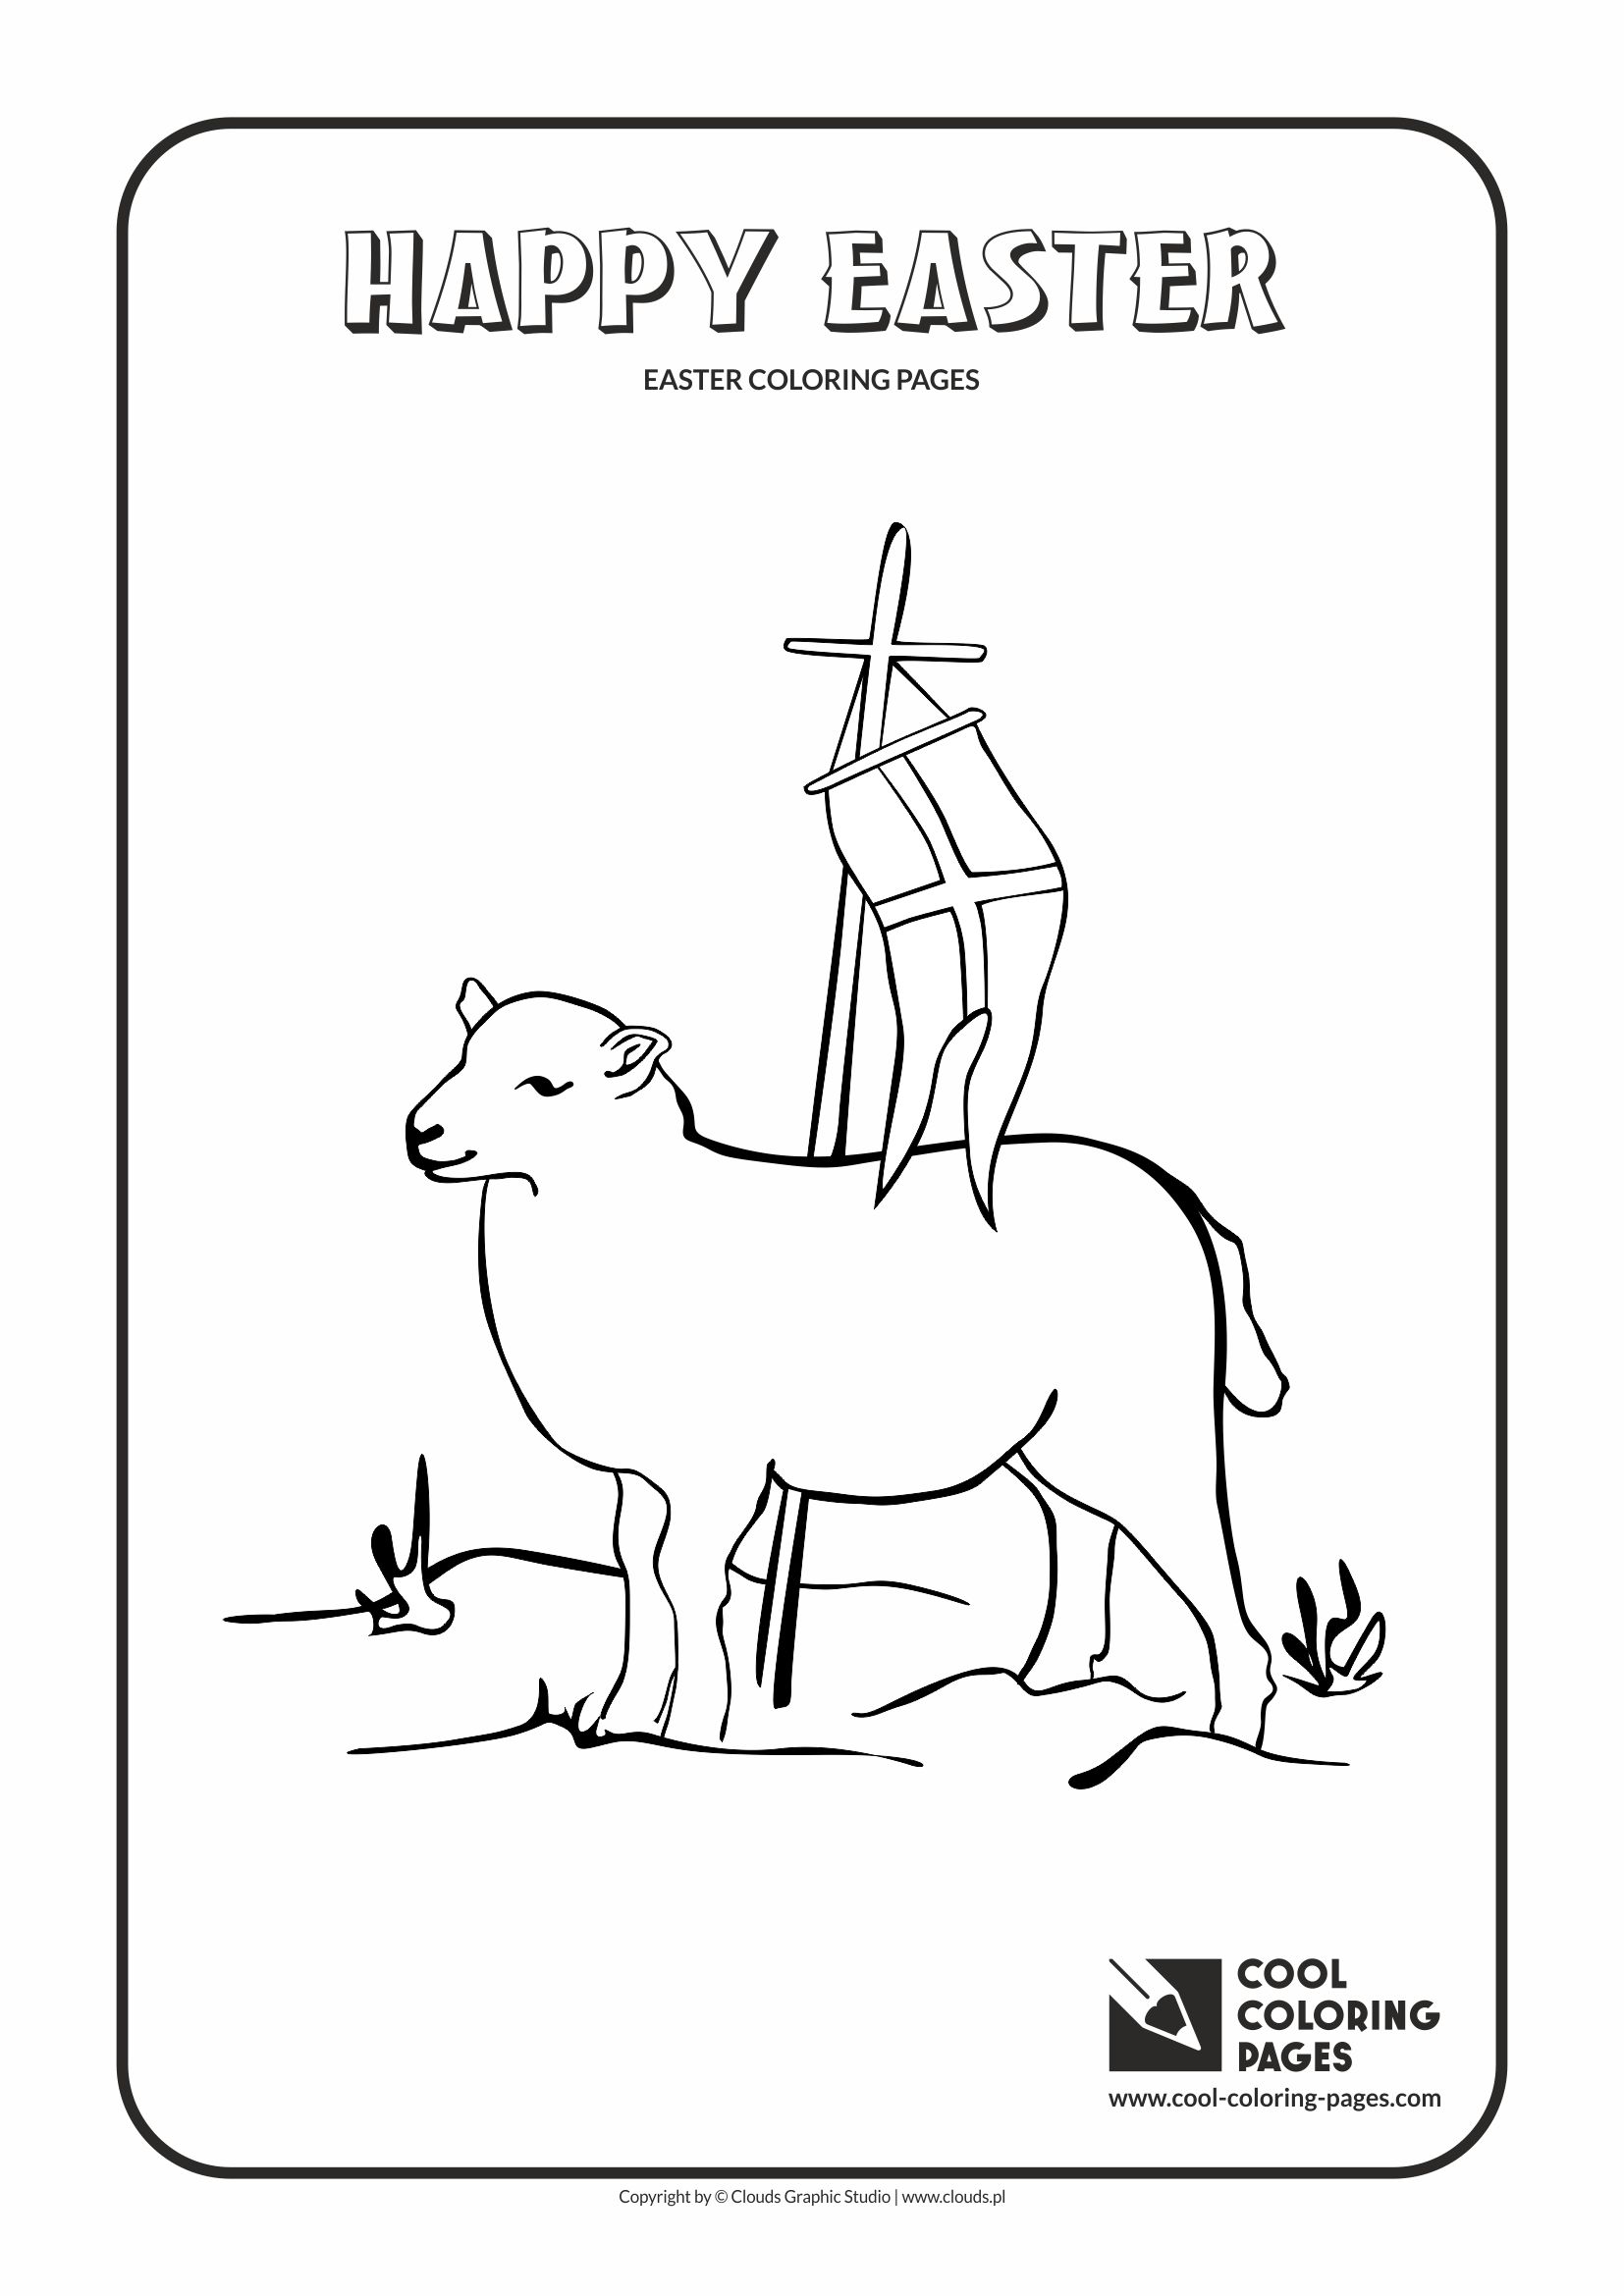 Cool Coloring Pages - Holidays / Easter lamb no 2 / Coloring page with Easter lamb no 2